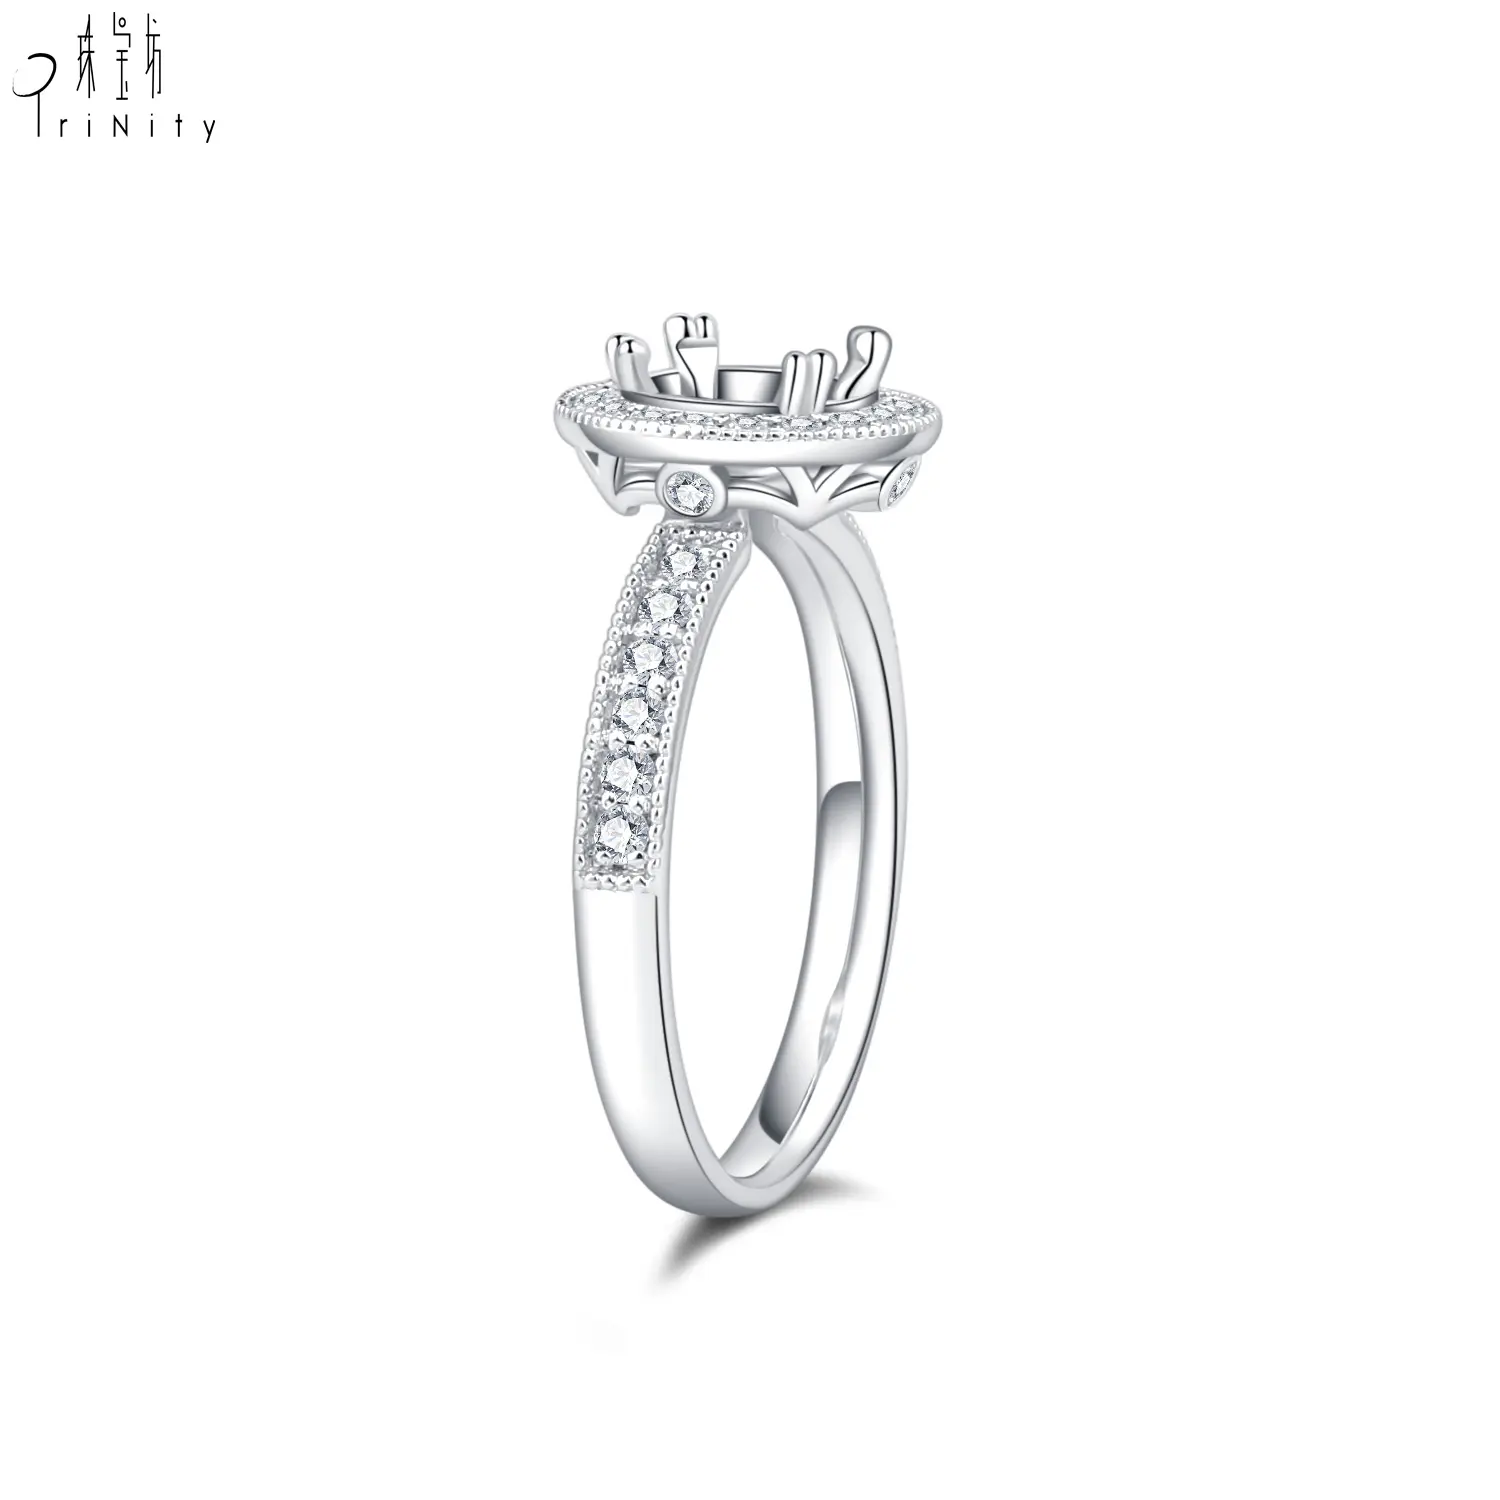 New Arrival Engagement Ring Classical Design 18k White Gold Ring Mounting Jewelry Semi Mount Setting For Women